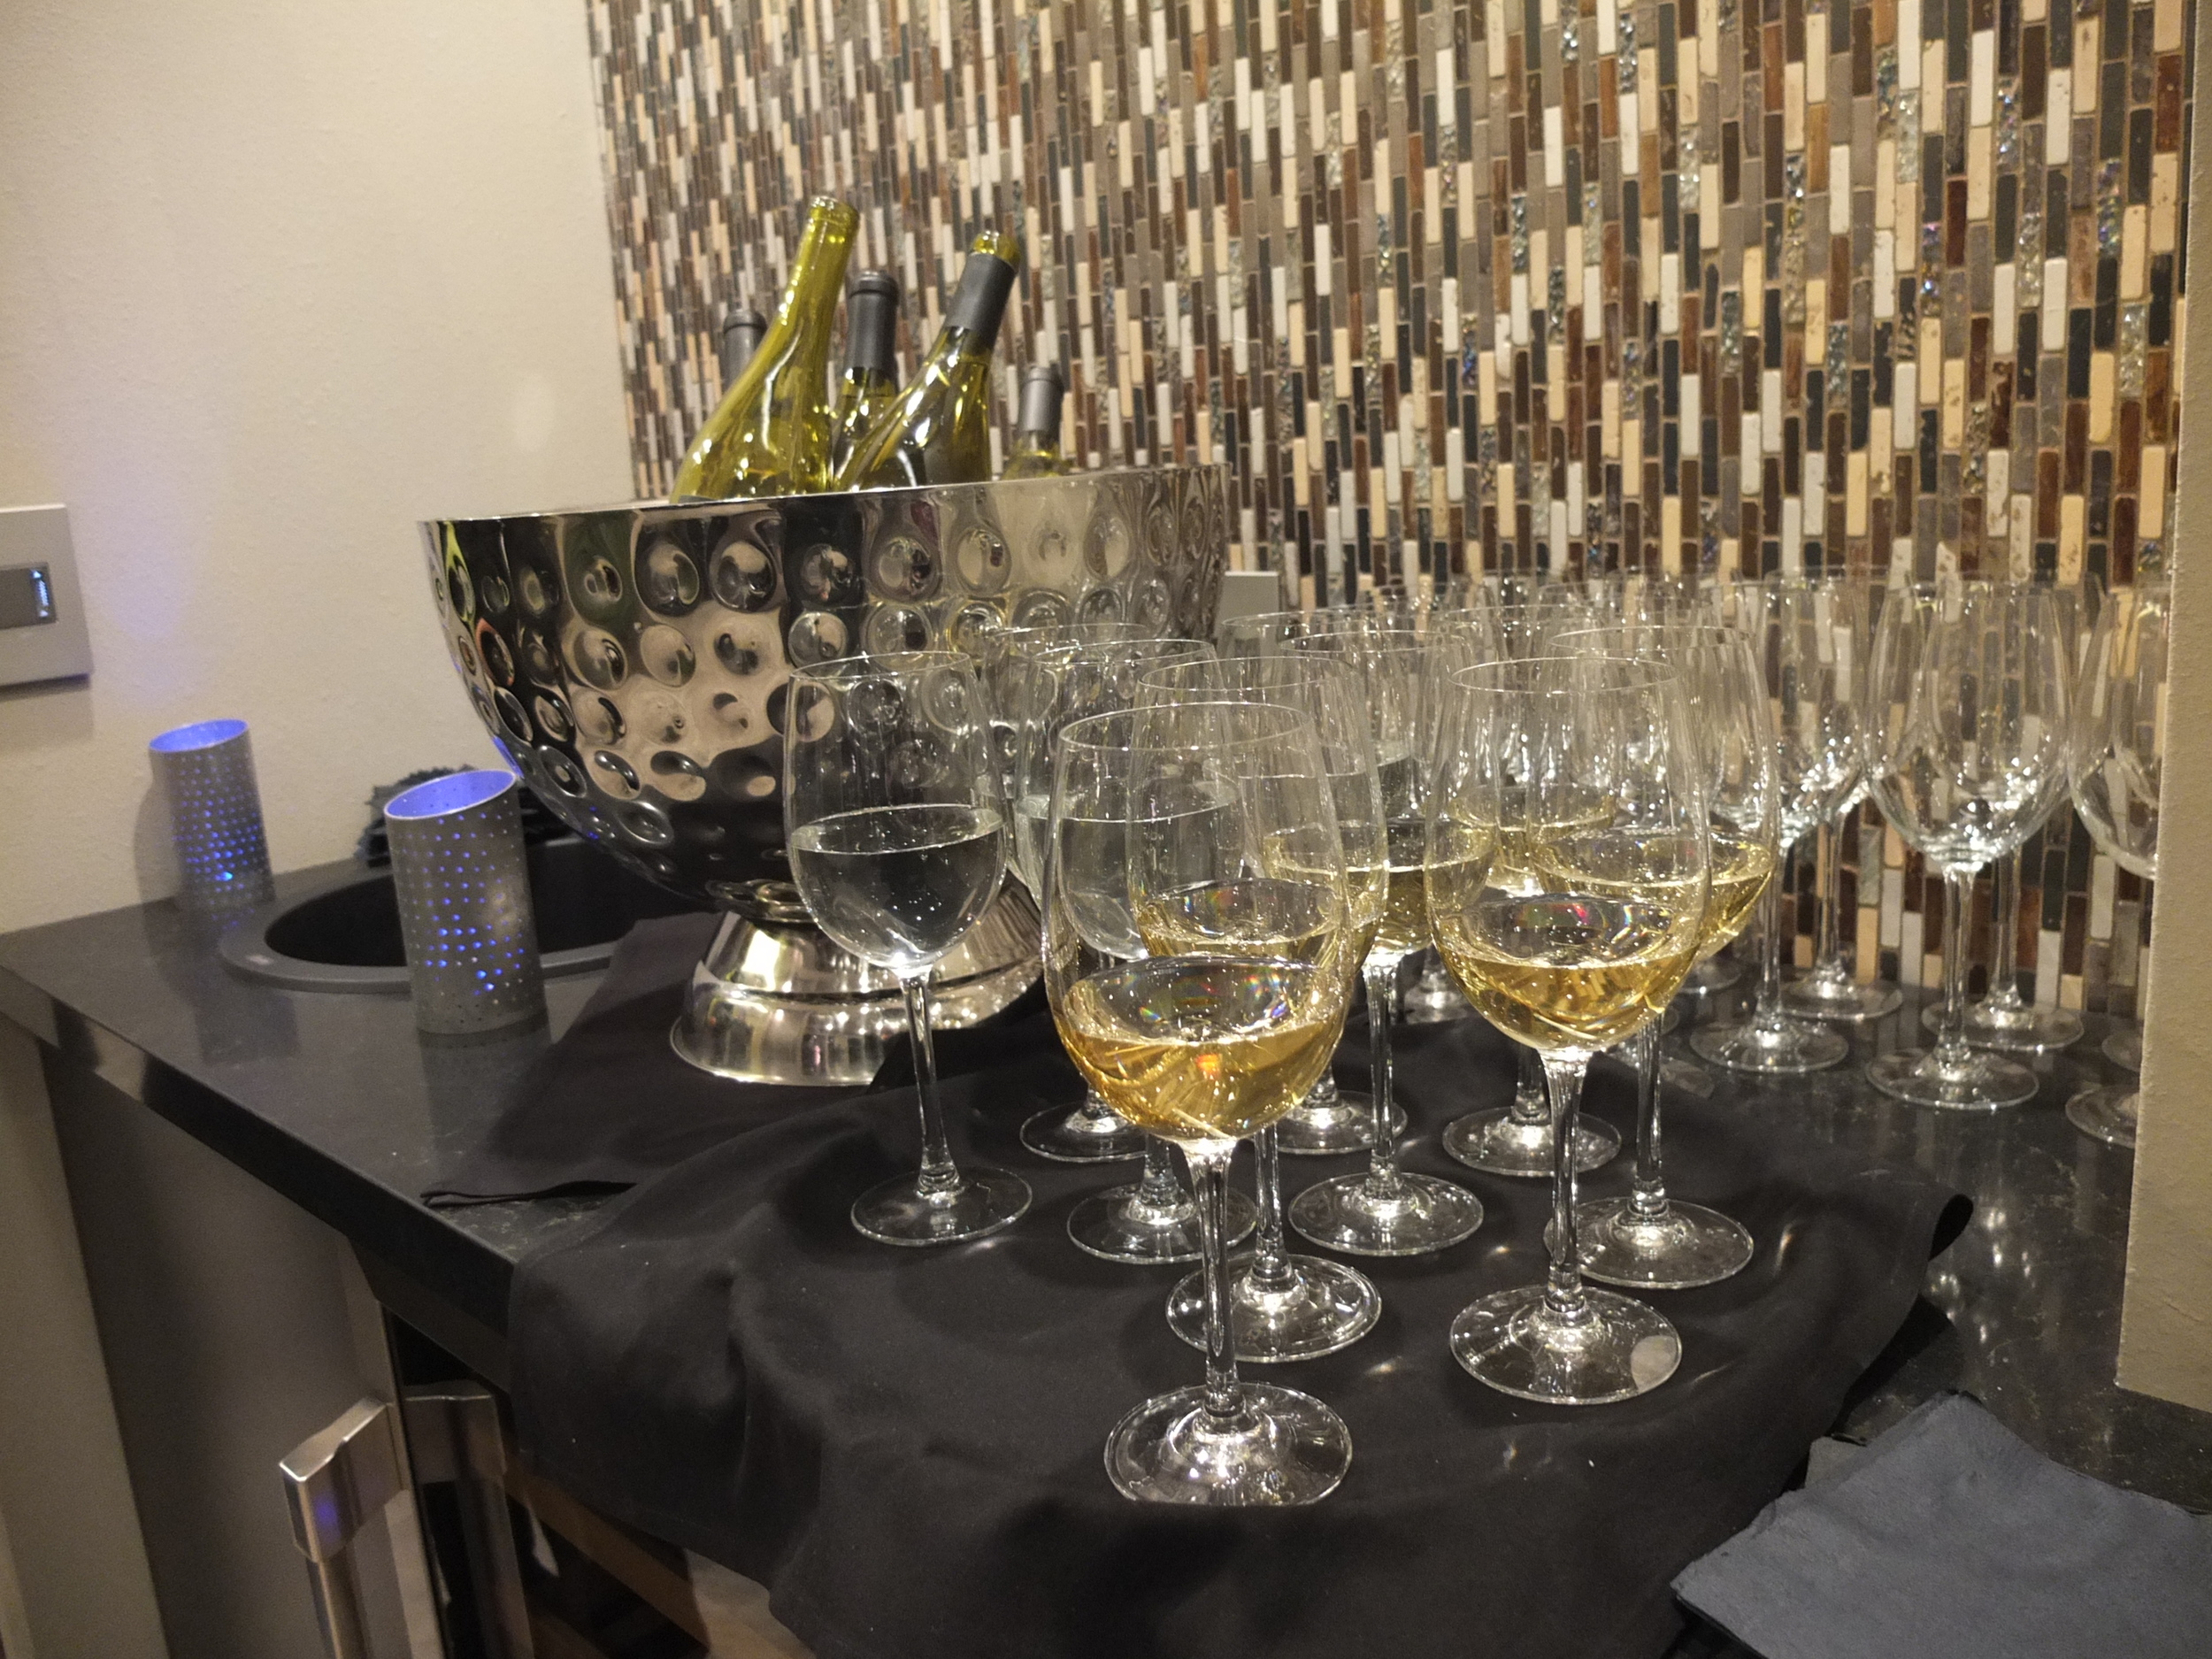 Best of #KBIS2015 | Photo taken during the Kitchen and Bath Industry Show (KBIS) penthouse party | Carla Aston reporting from Modenus' #BlogTourVegas